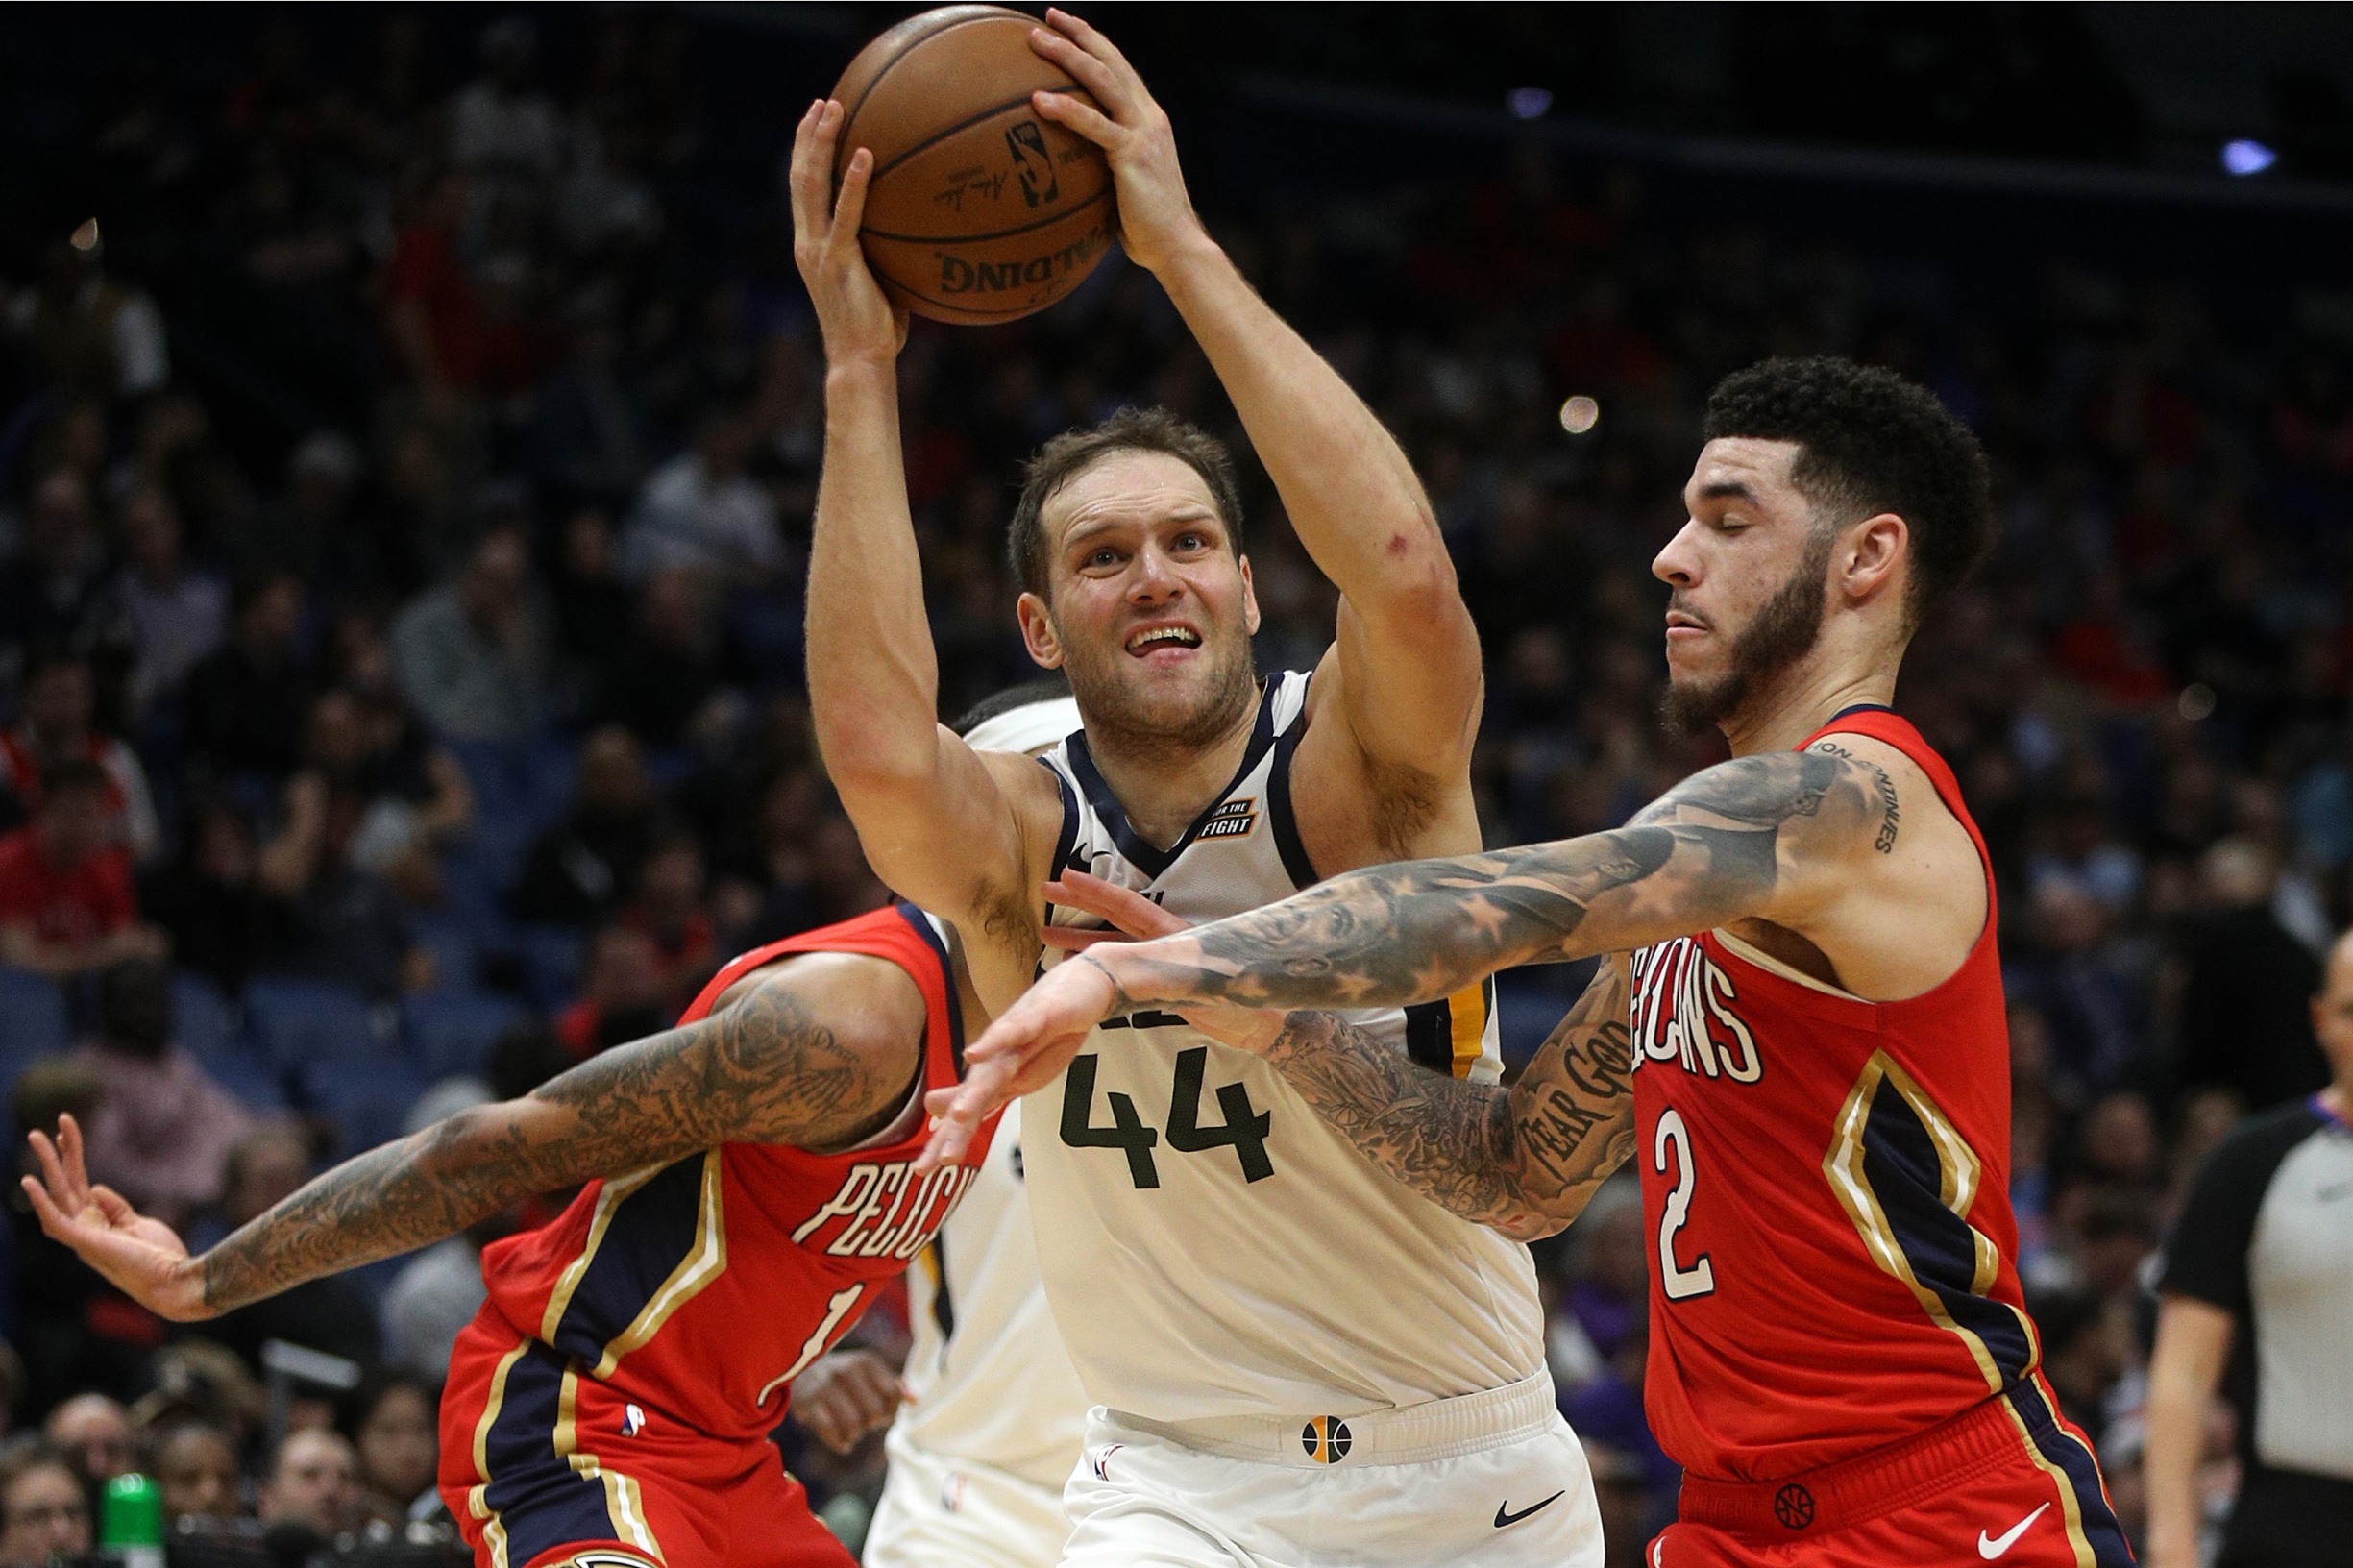 NEW ORLEANS, LOUISIANA - JANUARY 16: Bojan Bogdanovic #44 of the Utah Jazz shoots the ball over Lonzo Ball #2 of the New Orleans Pelicans at Smoothie King Center on January 16, 2020 in New Orleans, Louisiana.  NOTE TO USER: User expressly acknowledges and agrees that, by downloading and/or using this photograph, user is consenting to the terms and conditions of the Getty Images License Agreement.   (Photo by Chris Graythen/Getty Images)